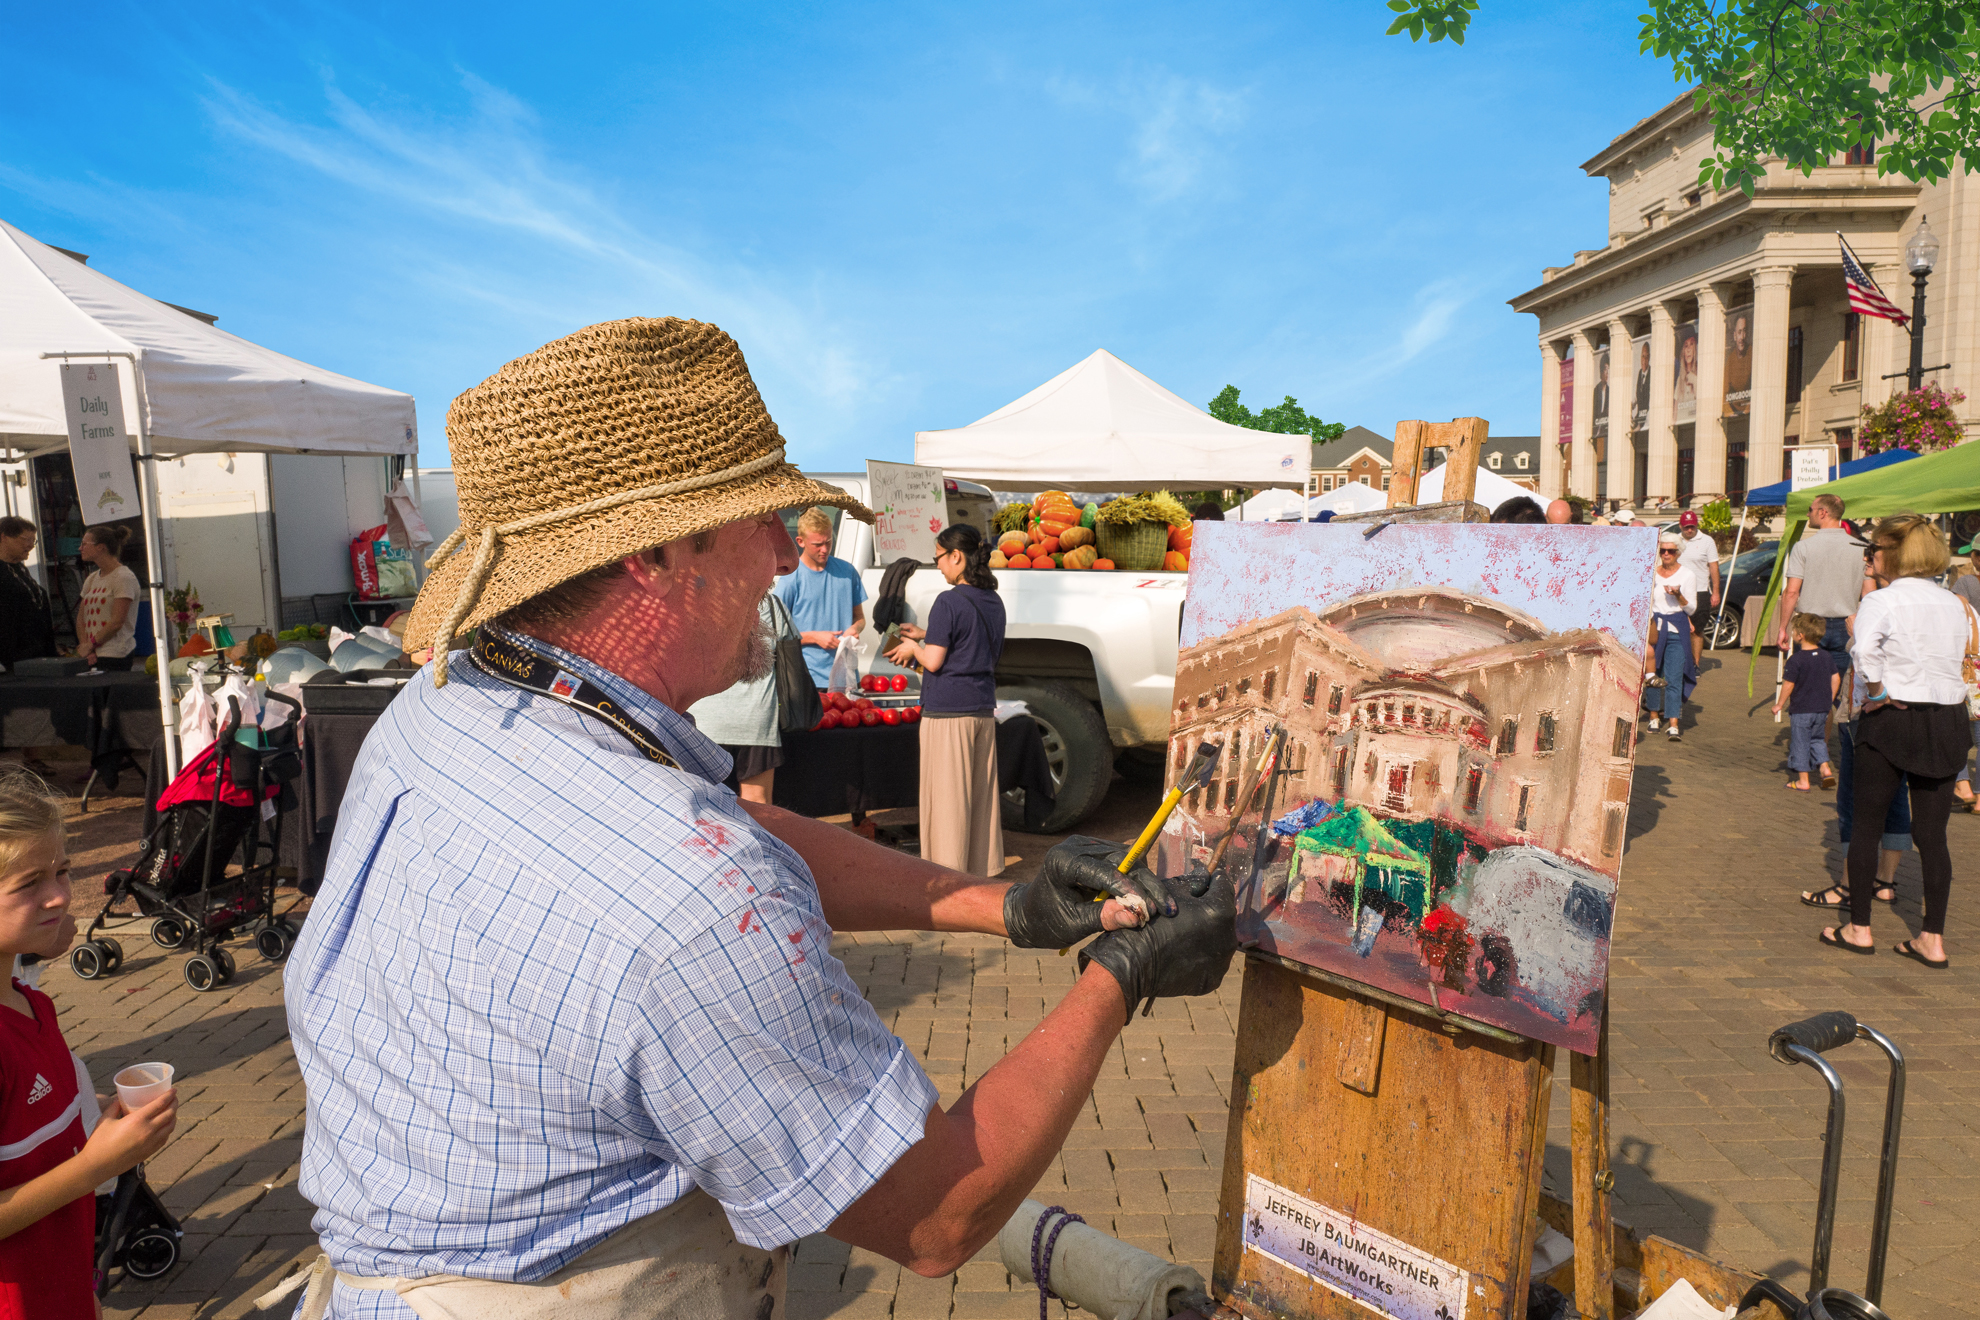 A man paints on an easel at the city square in Carmel Indiana